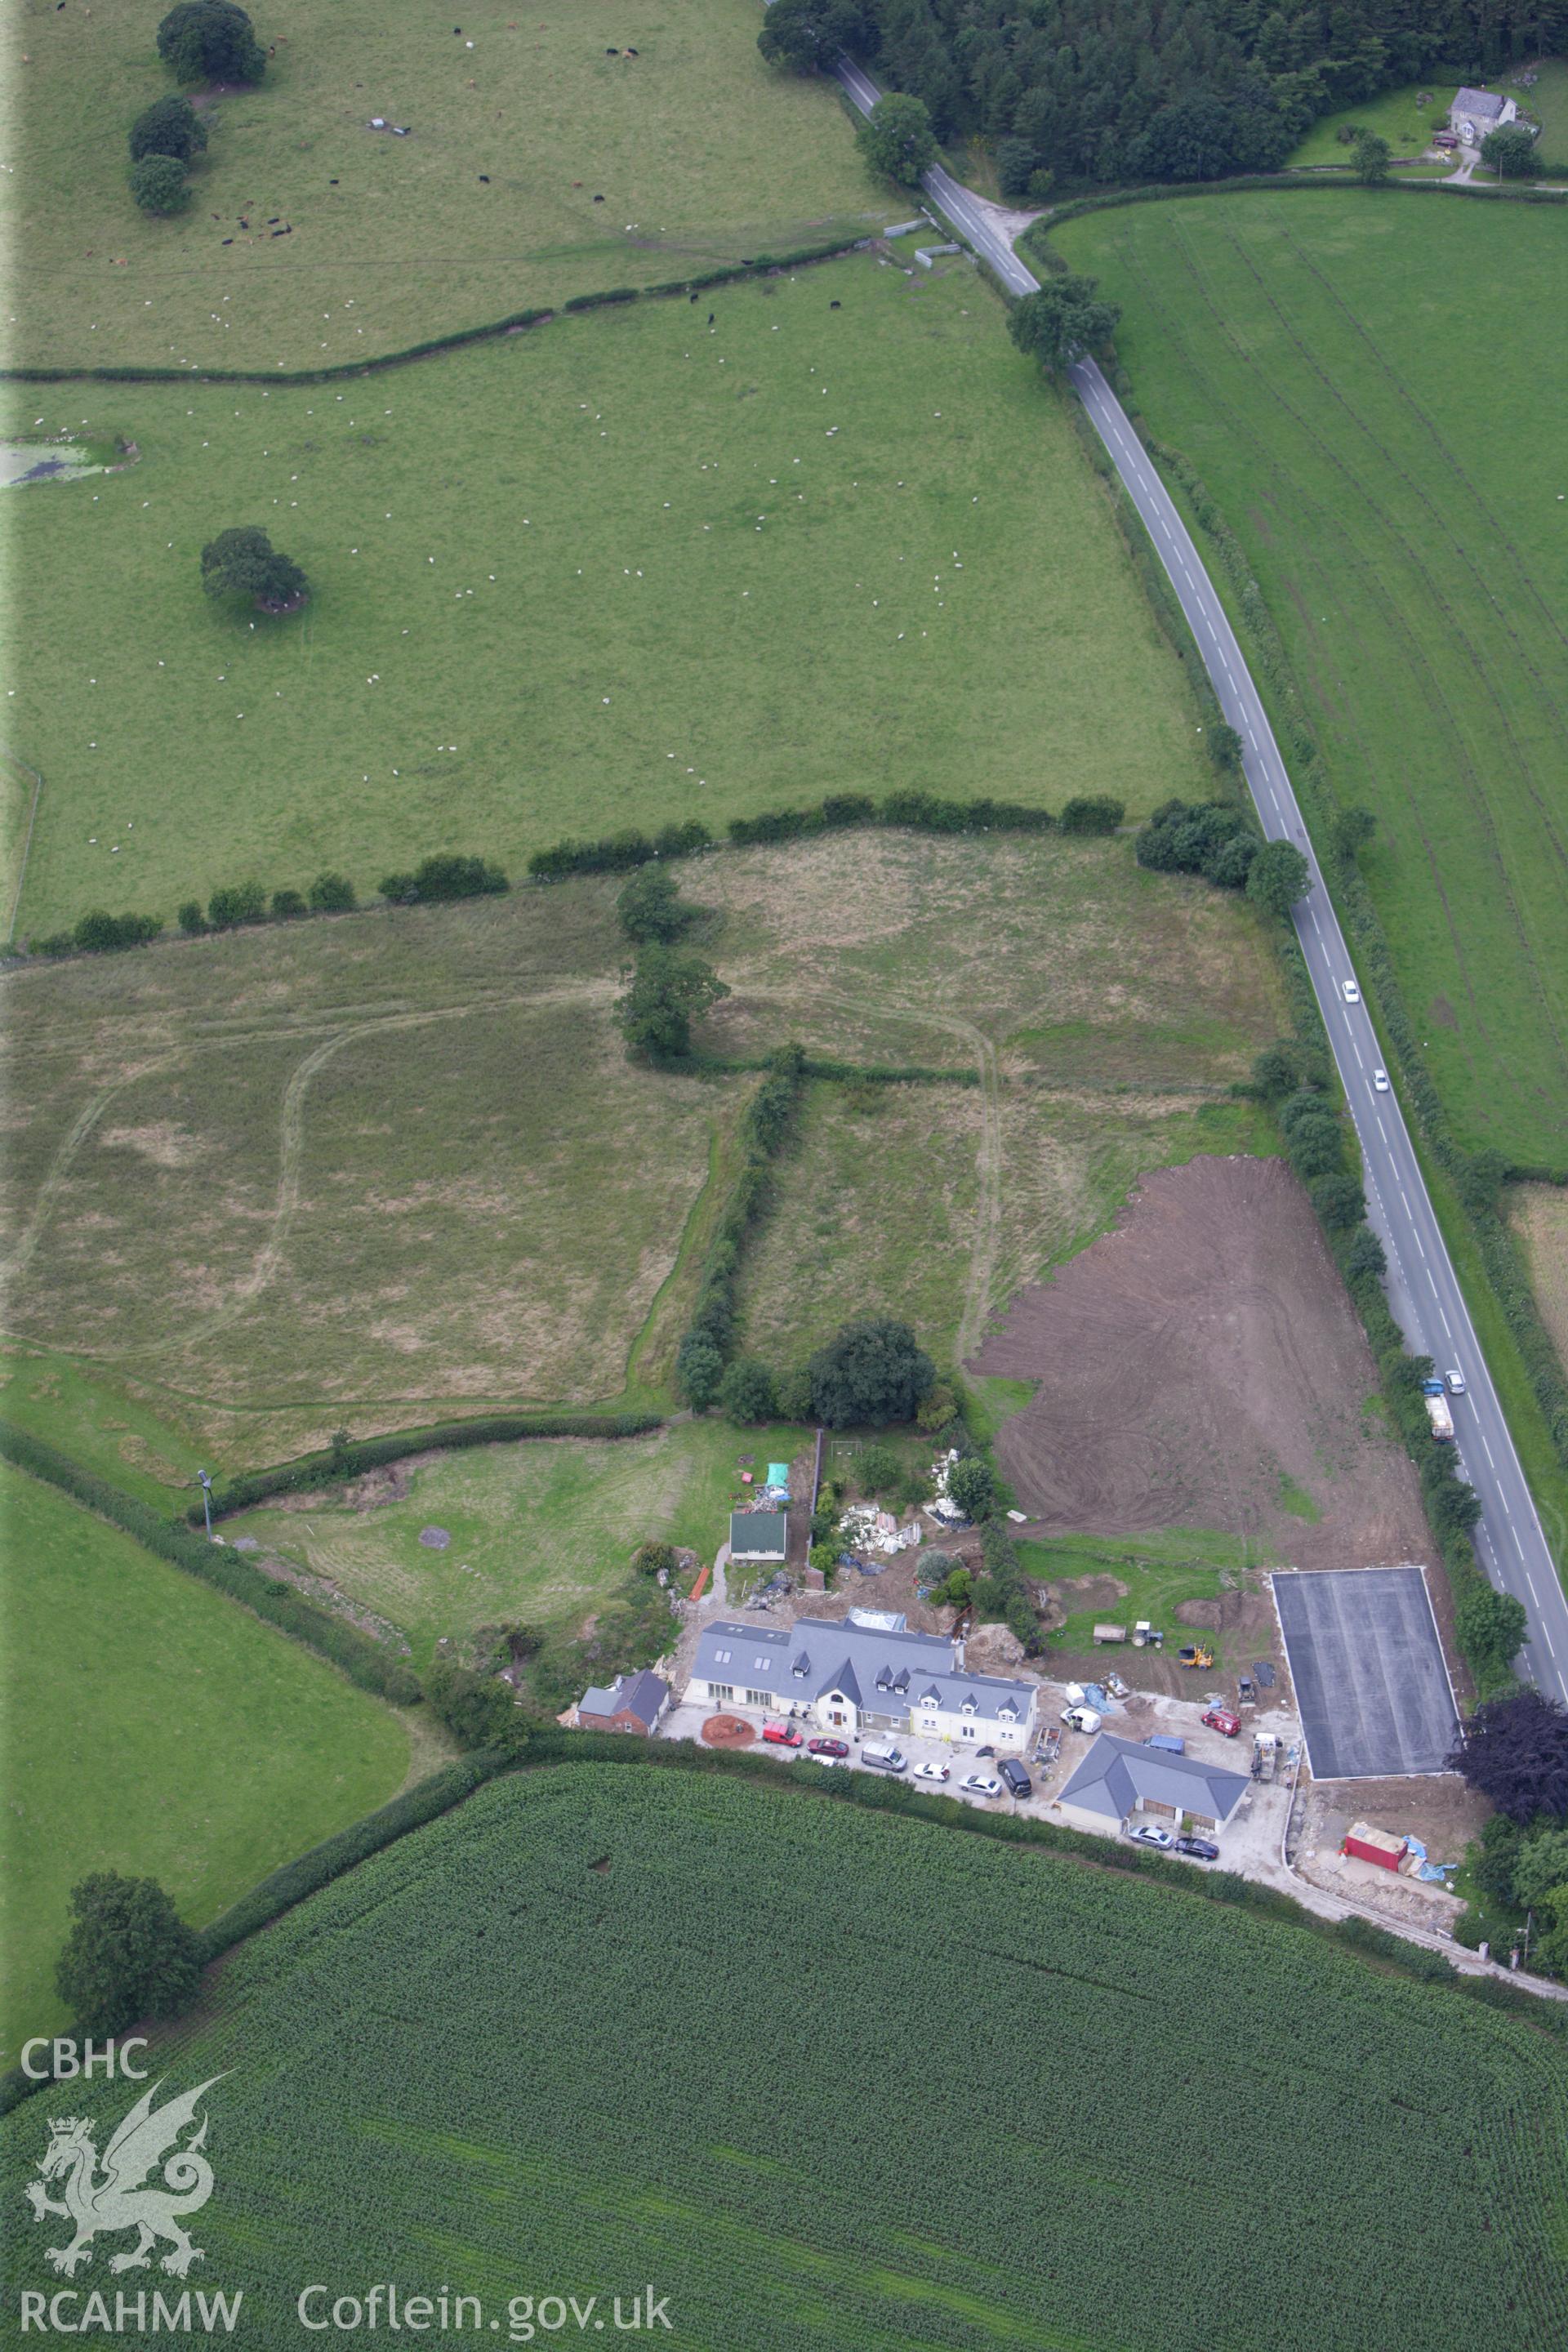 RCAHMW colour oblique aerial photograph of a section of Offa's Dyke, or Whitford Dyke, northwest and southeast of Brynbella Mound. Building work is visible nearby. Taken on 30 July 2009 by Toby Driver